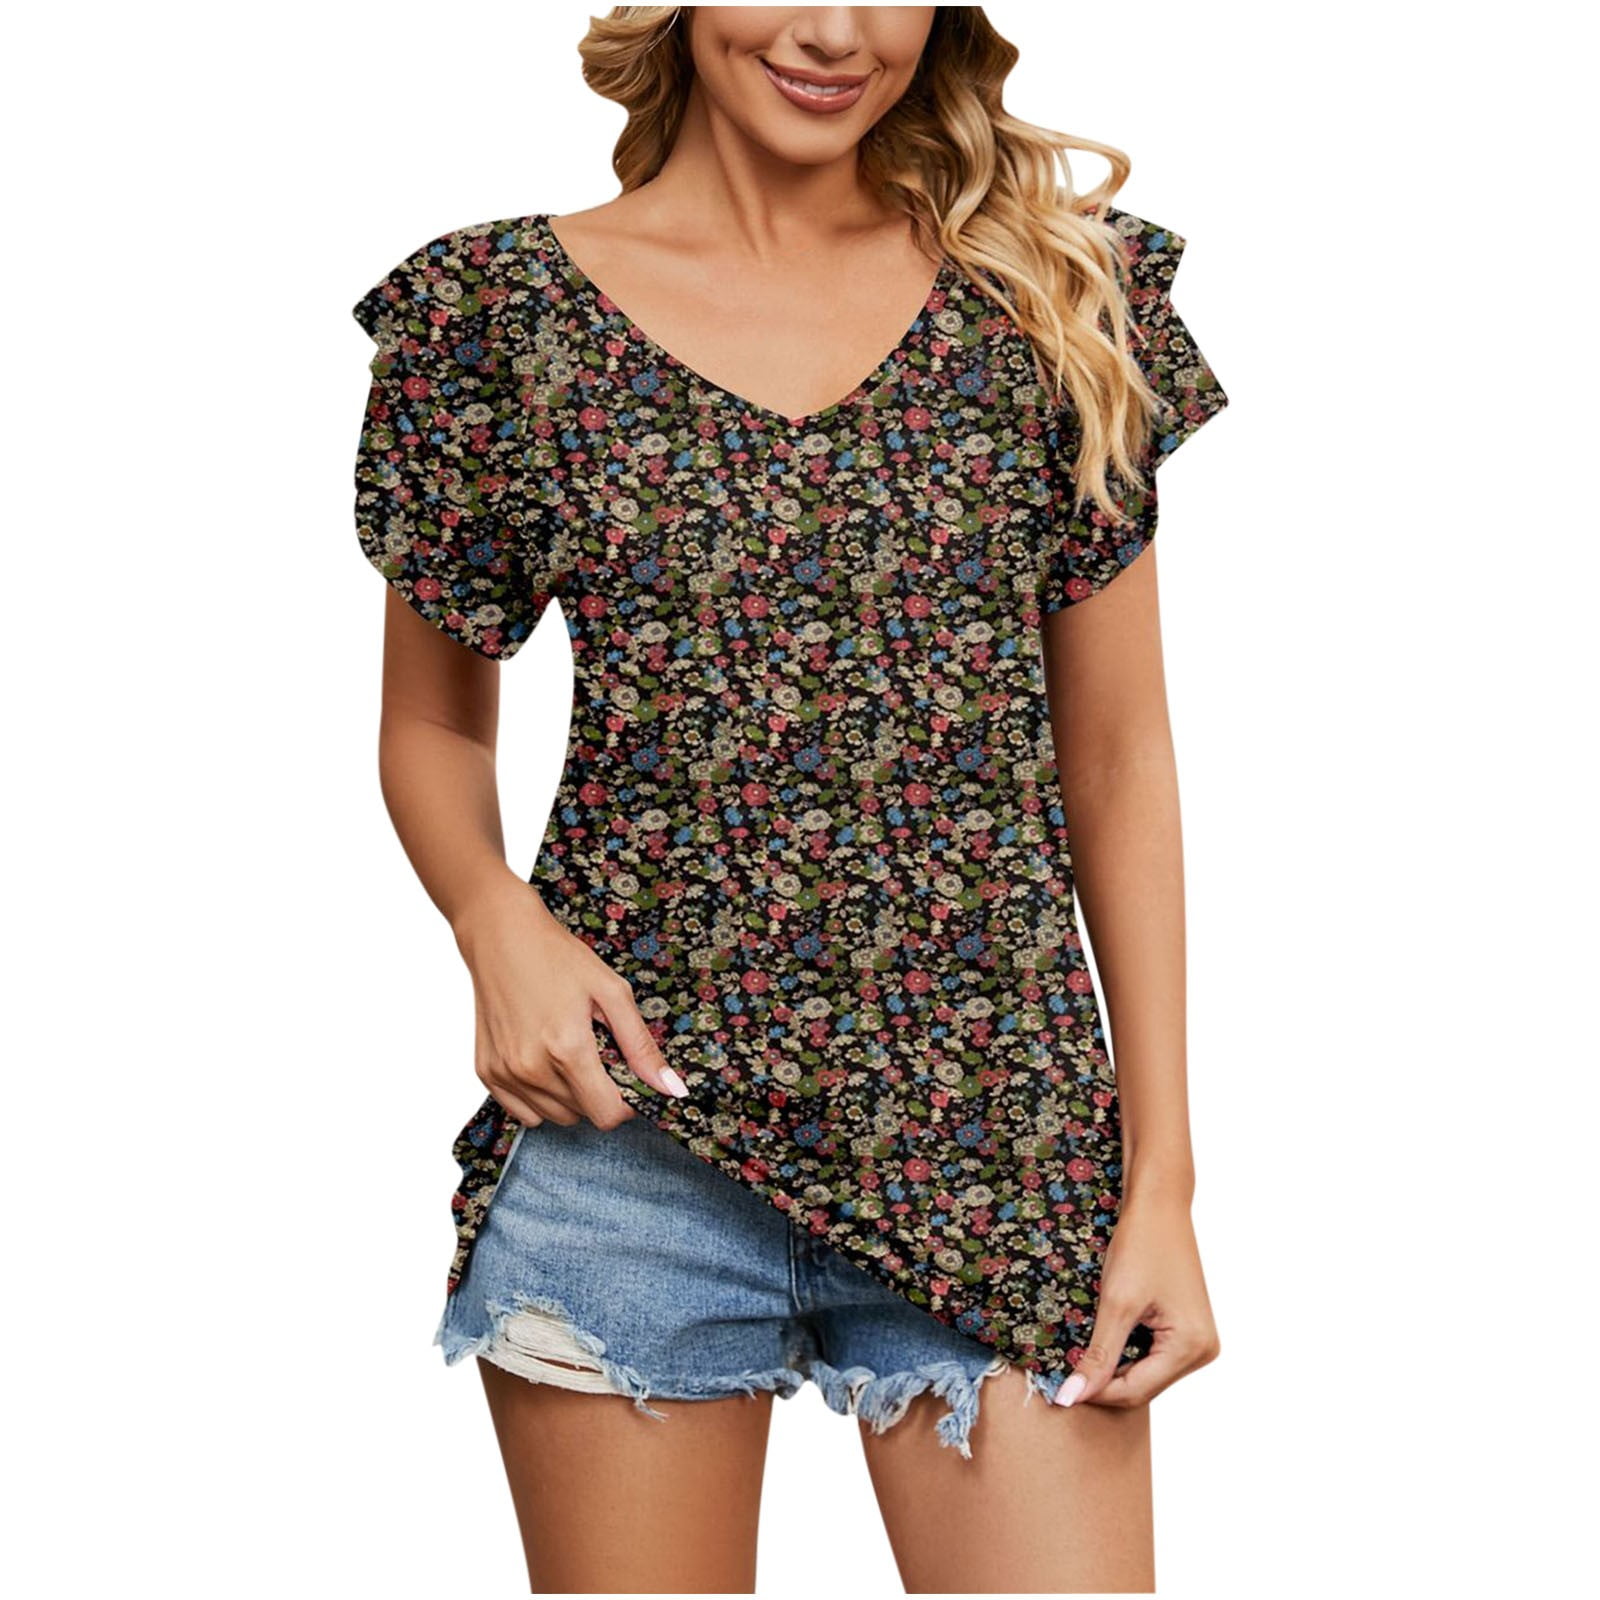 REORIAFEE Sales Today Clearance Only Fashion T-Shirt Floral Print Lace  Three Quarter Sleeve Blouse V-Neck Casual Tops Yellow L 